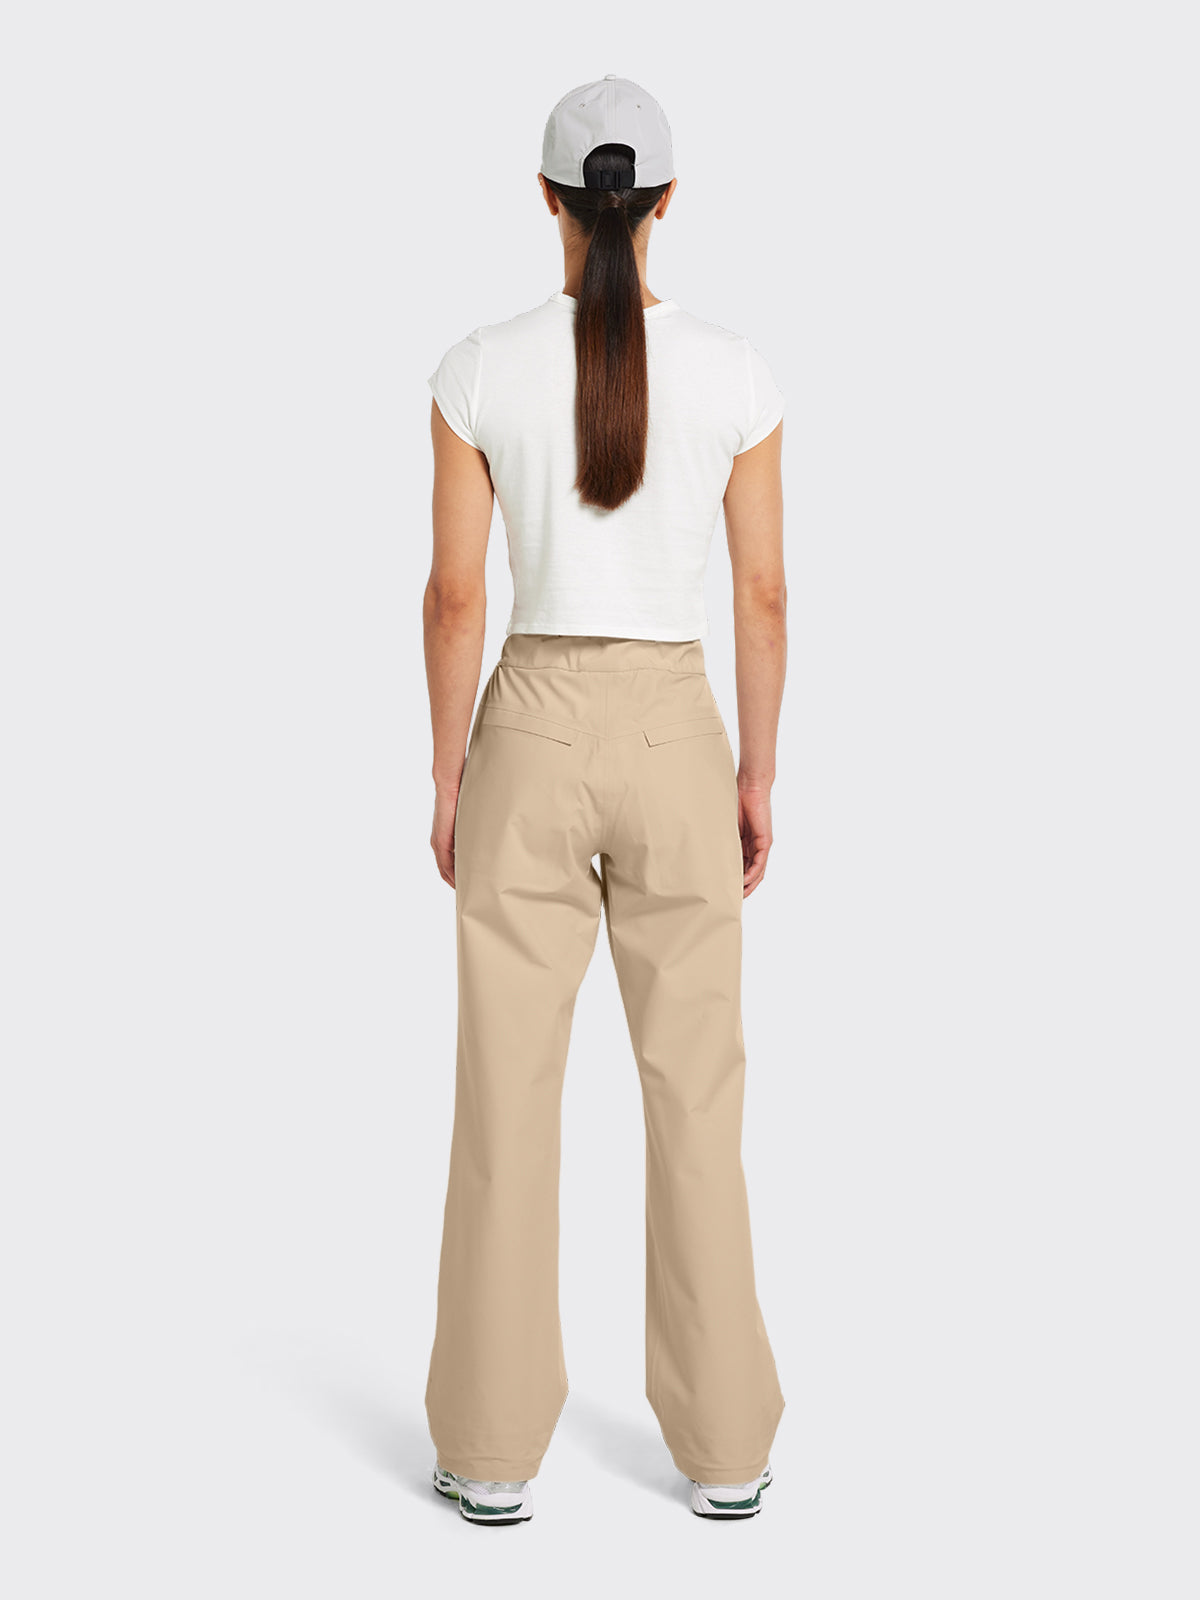 Woman dressed in Nørve pant from Blæst in Beige